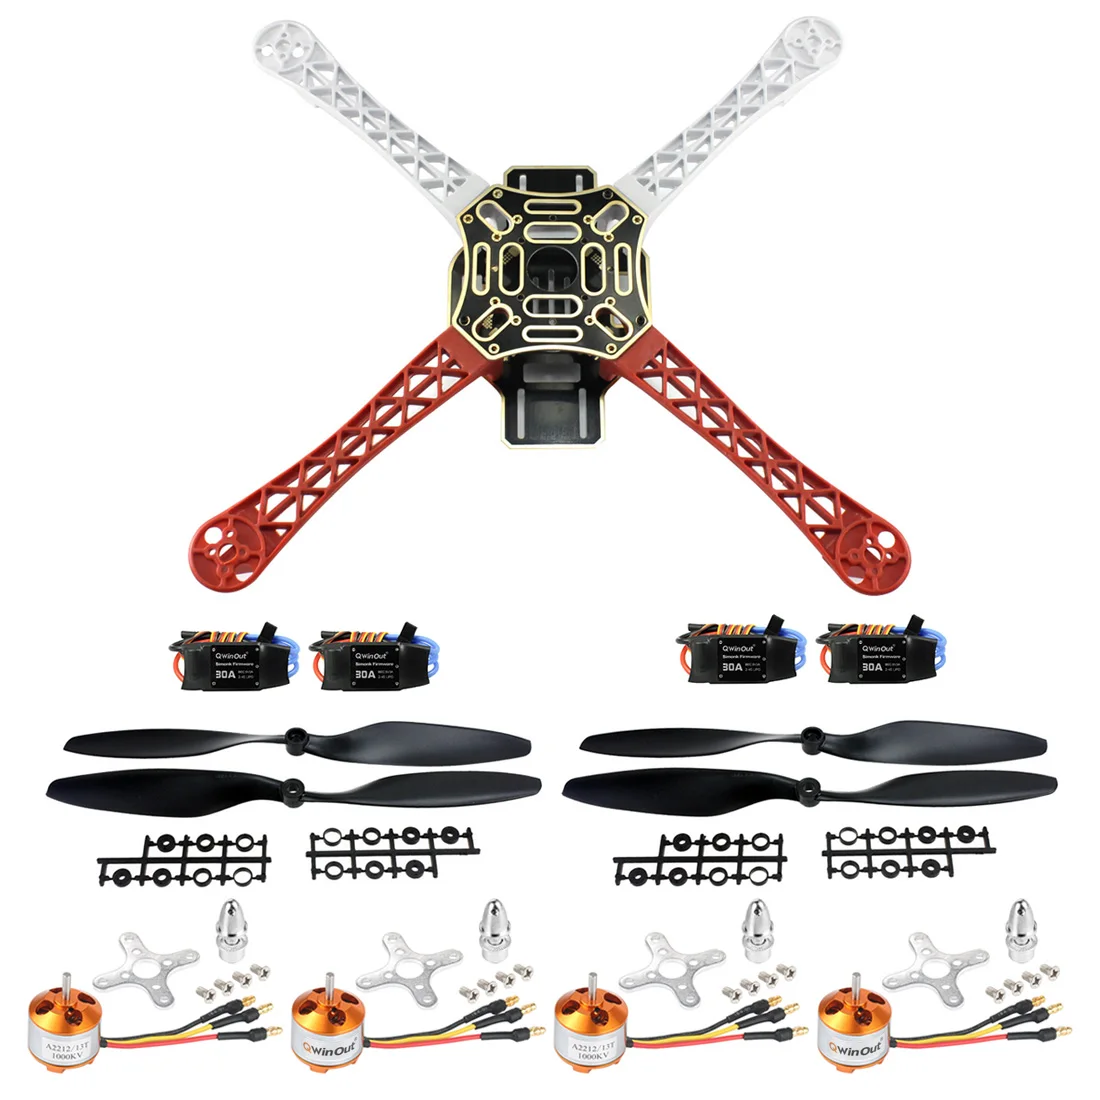 

F450 4-Alex Airframe 450mm Drone Frame Kit w/ 2-4S 30A RC Brushless ESC A2212 1000KV Brushless Motor 13T 1045 CW CCW Propellers